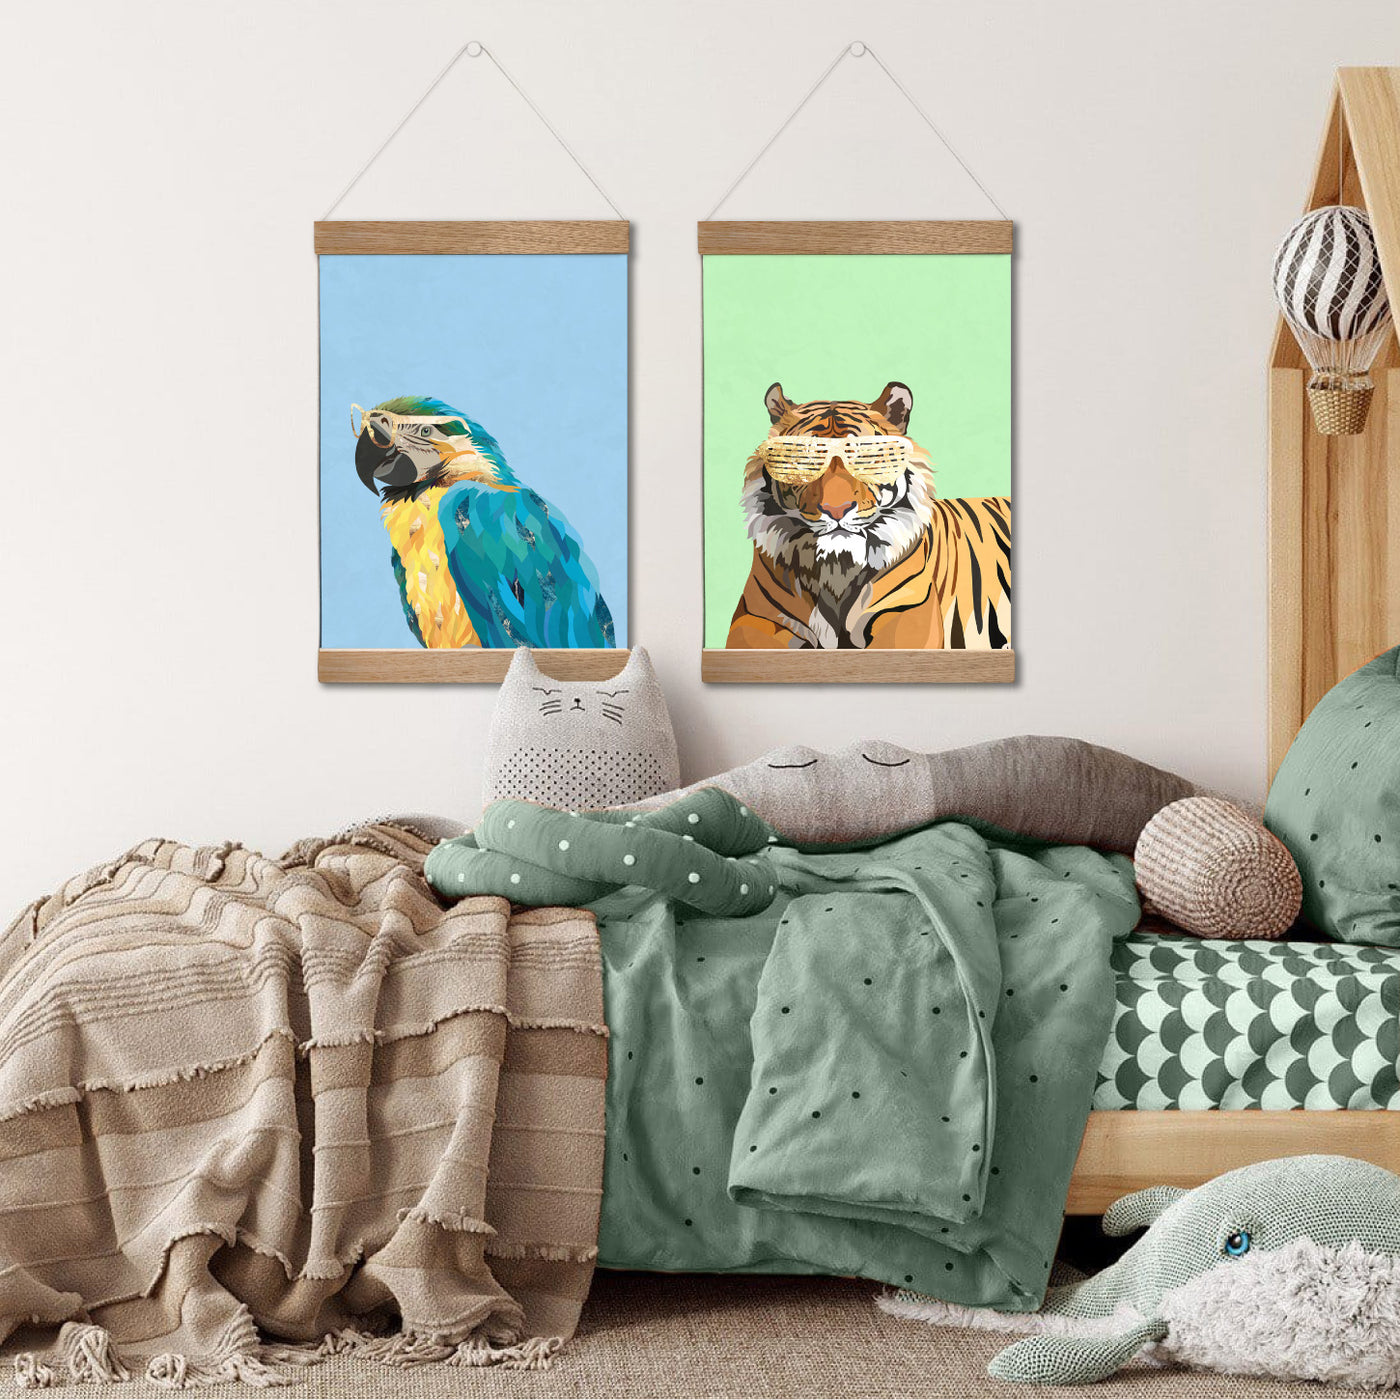 Parrot Pop - Art Print, Poster, Stretched Canvas or Framed Wall Art Prints, shown framed in a room